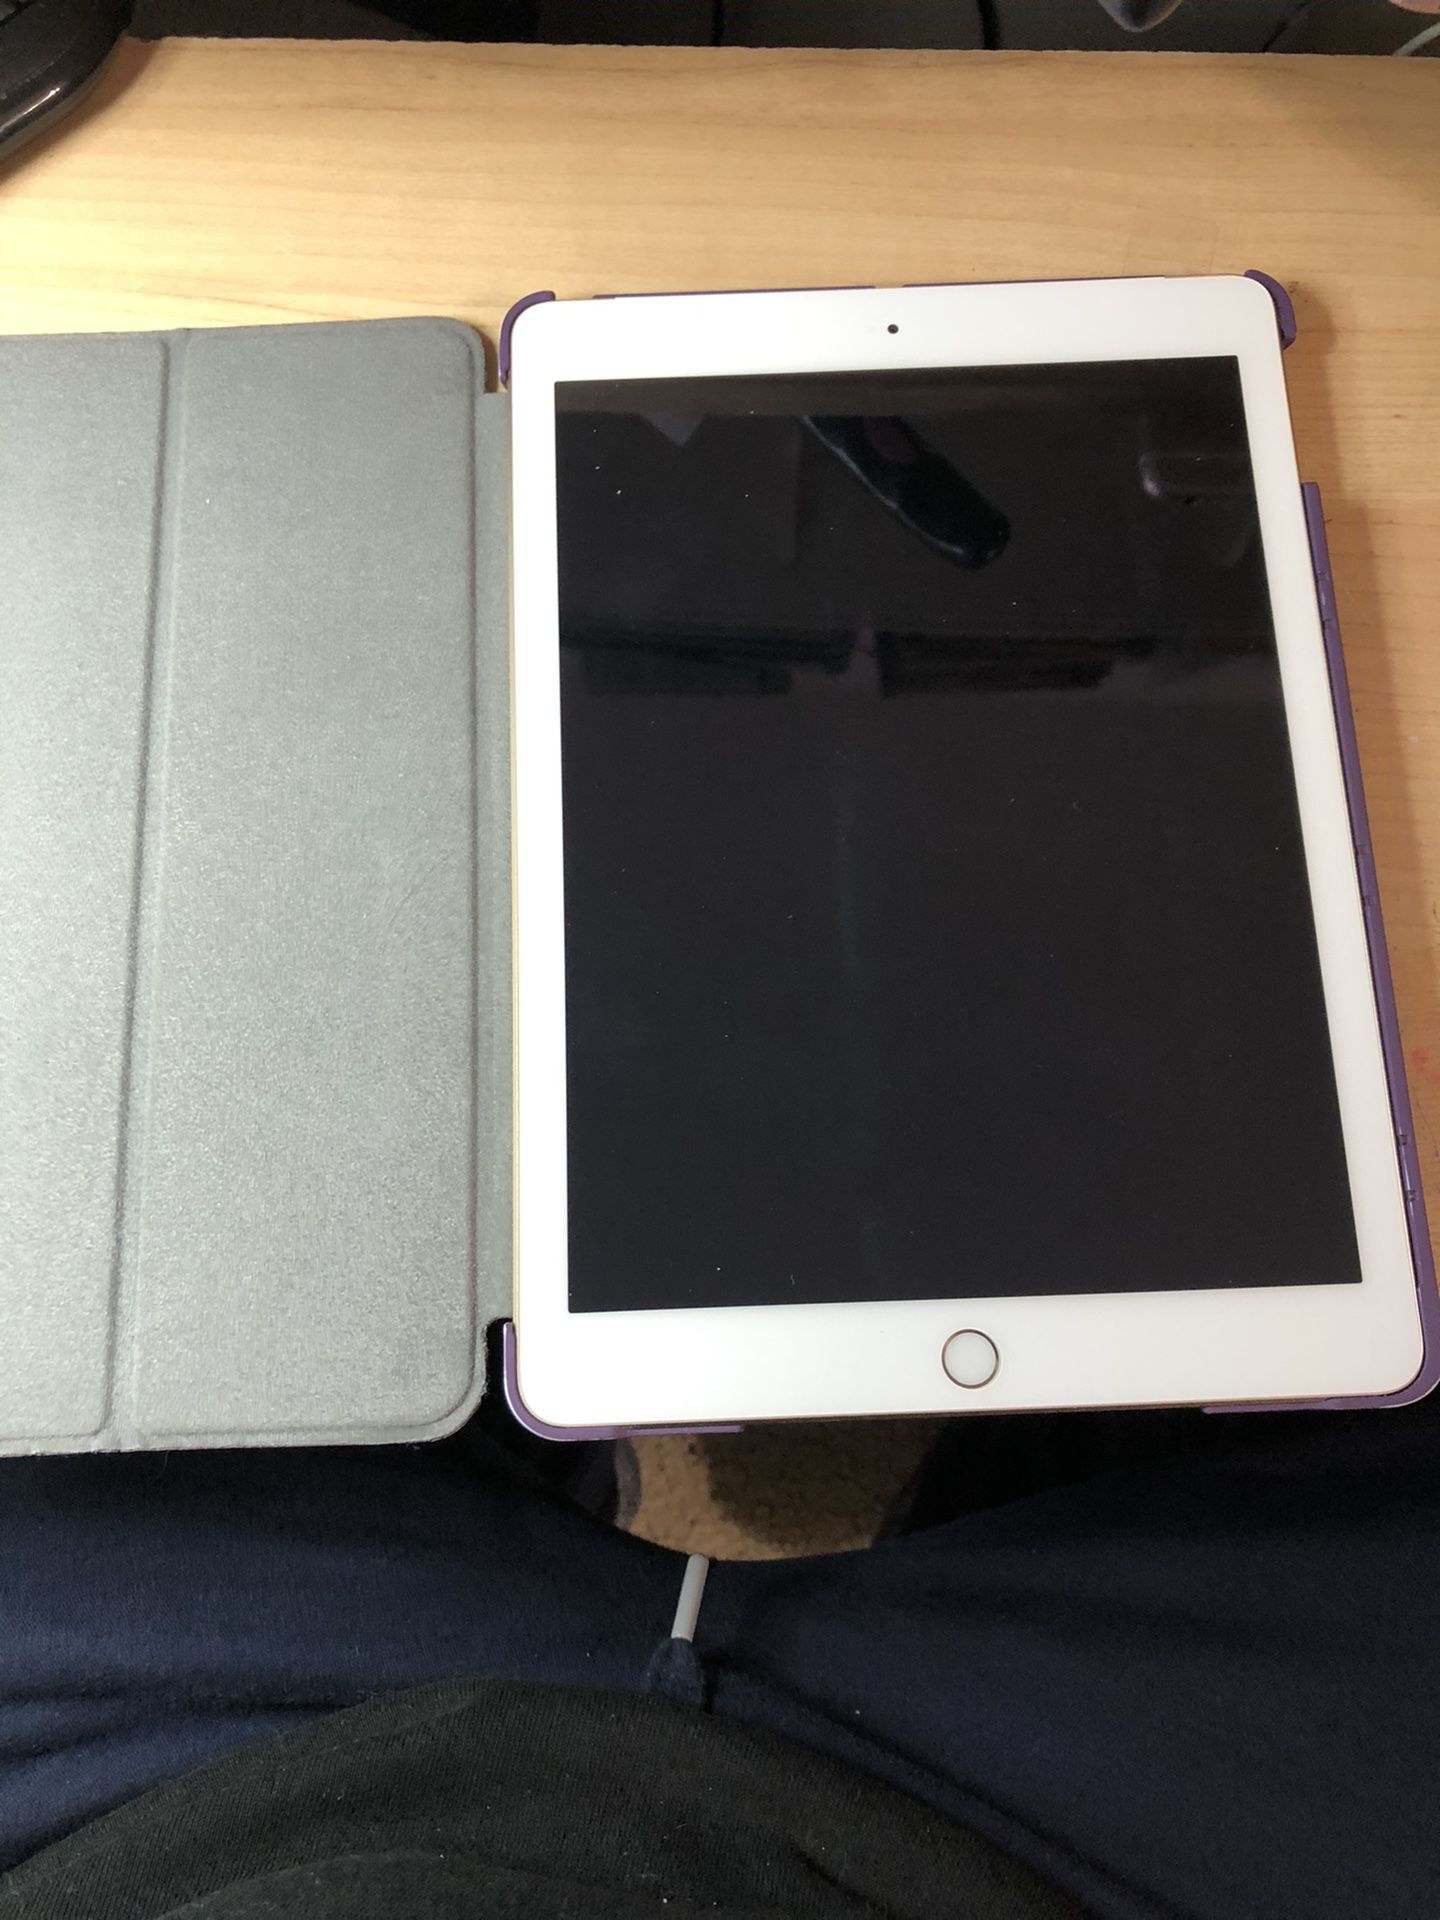 iPad 5th generation, 32gb, WiFi,telephone, unlocked any carrier, with case protector and original box, with charger